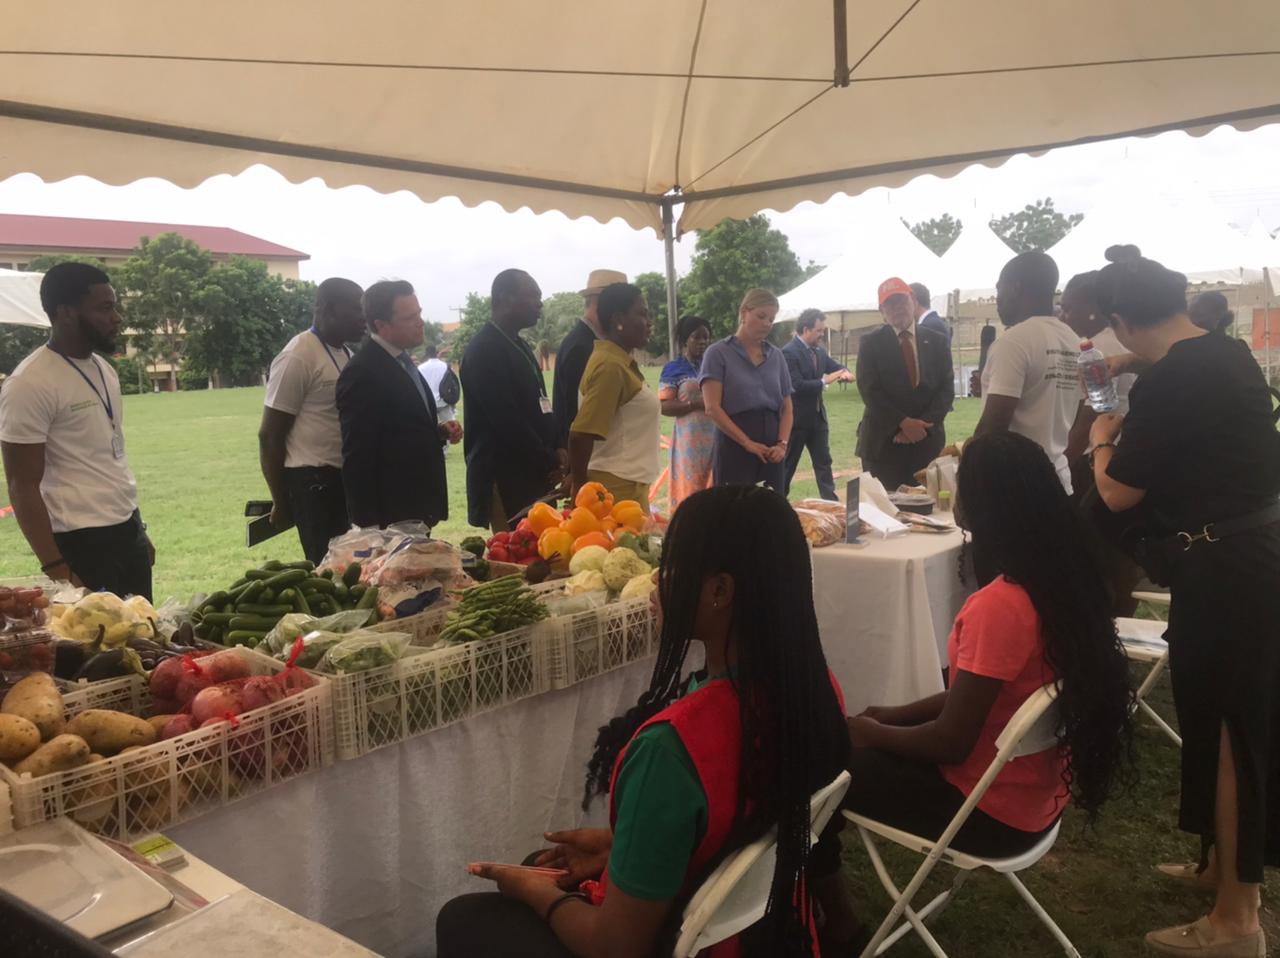 Netherlands to invest €4m in Ghana’s agricultural industry